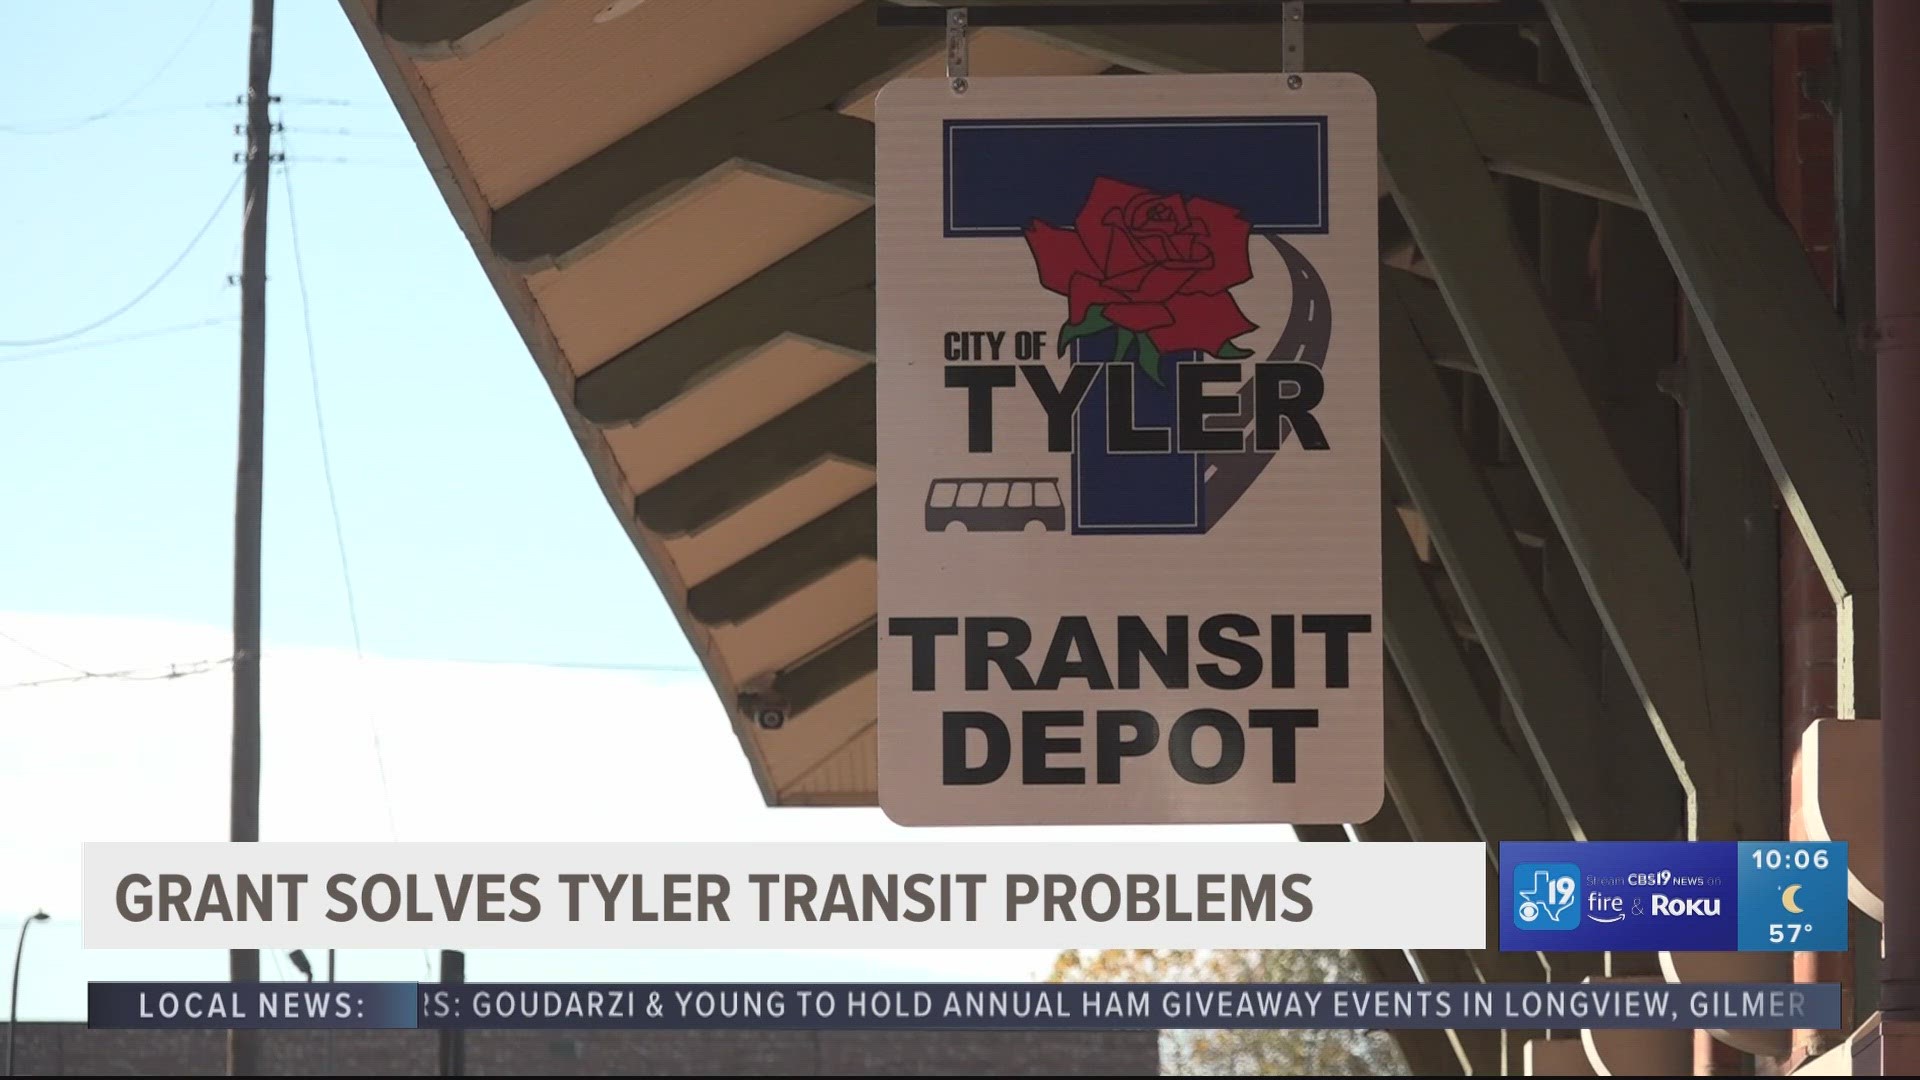 On Wednesday, the City Council approved a $150,000 grant from the East Texas Council of Governments to help with operating Tyler Transit.